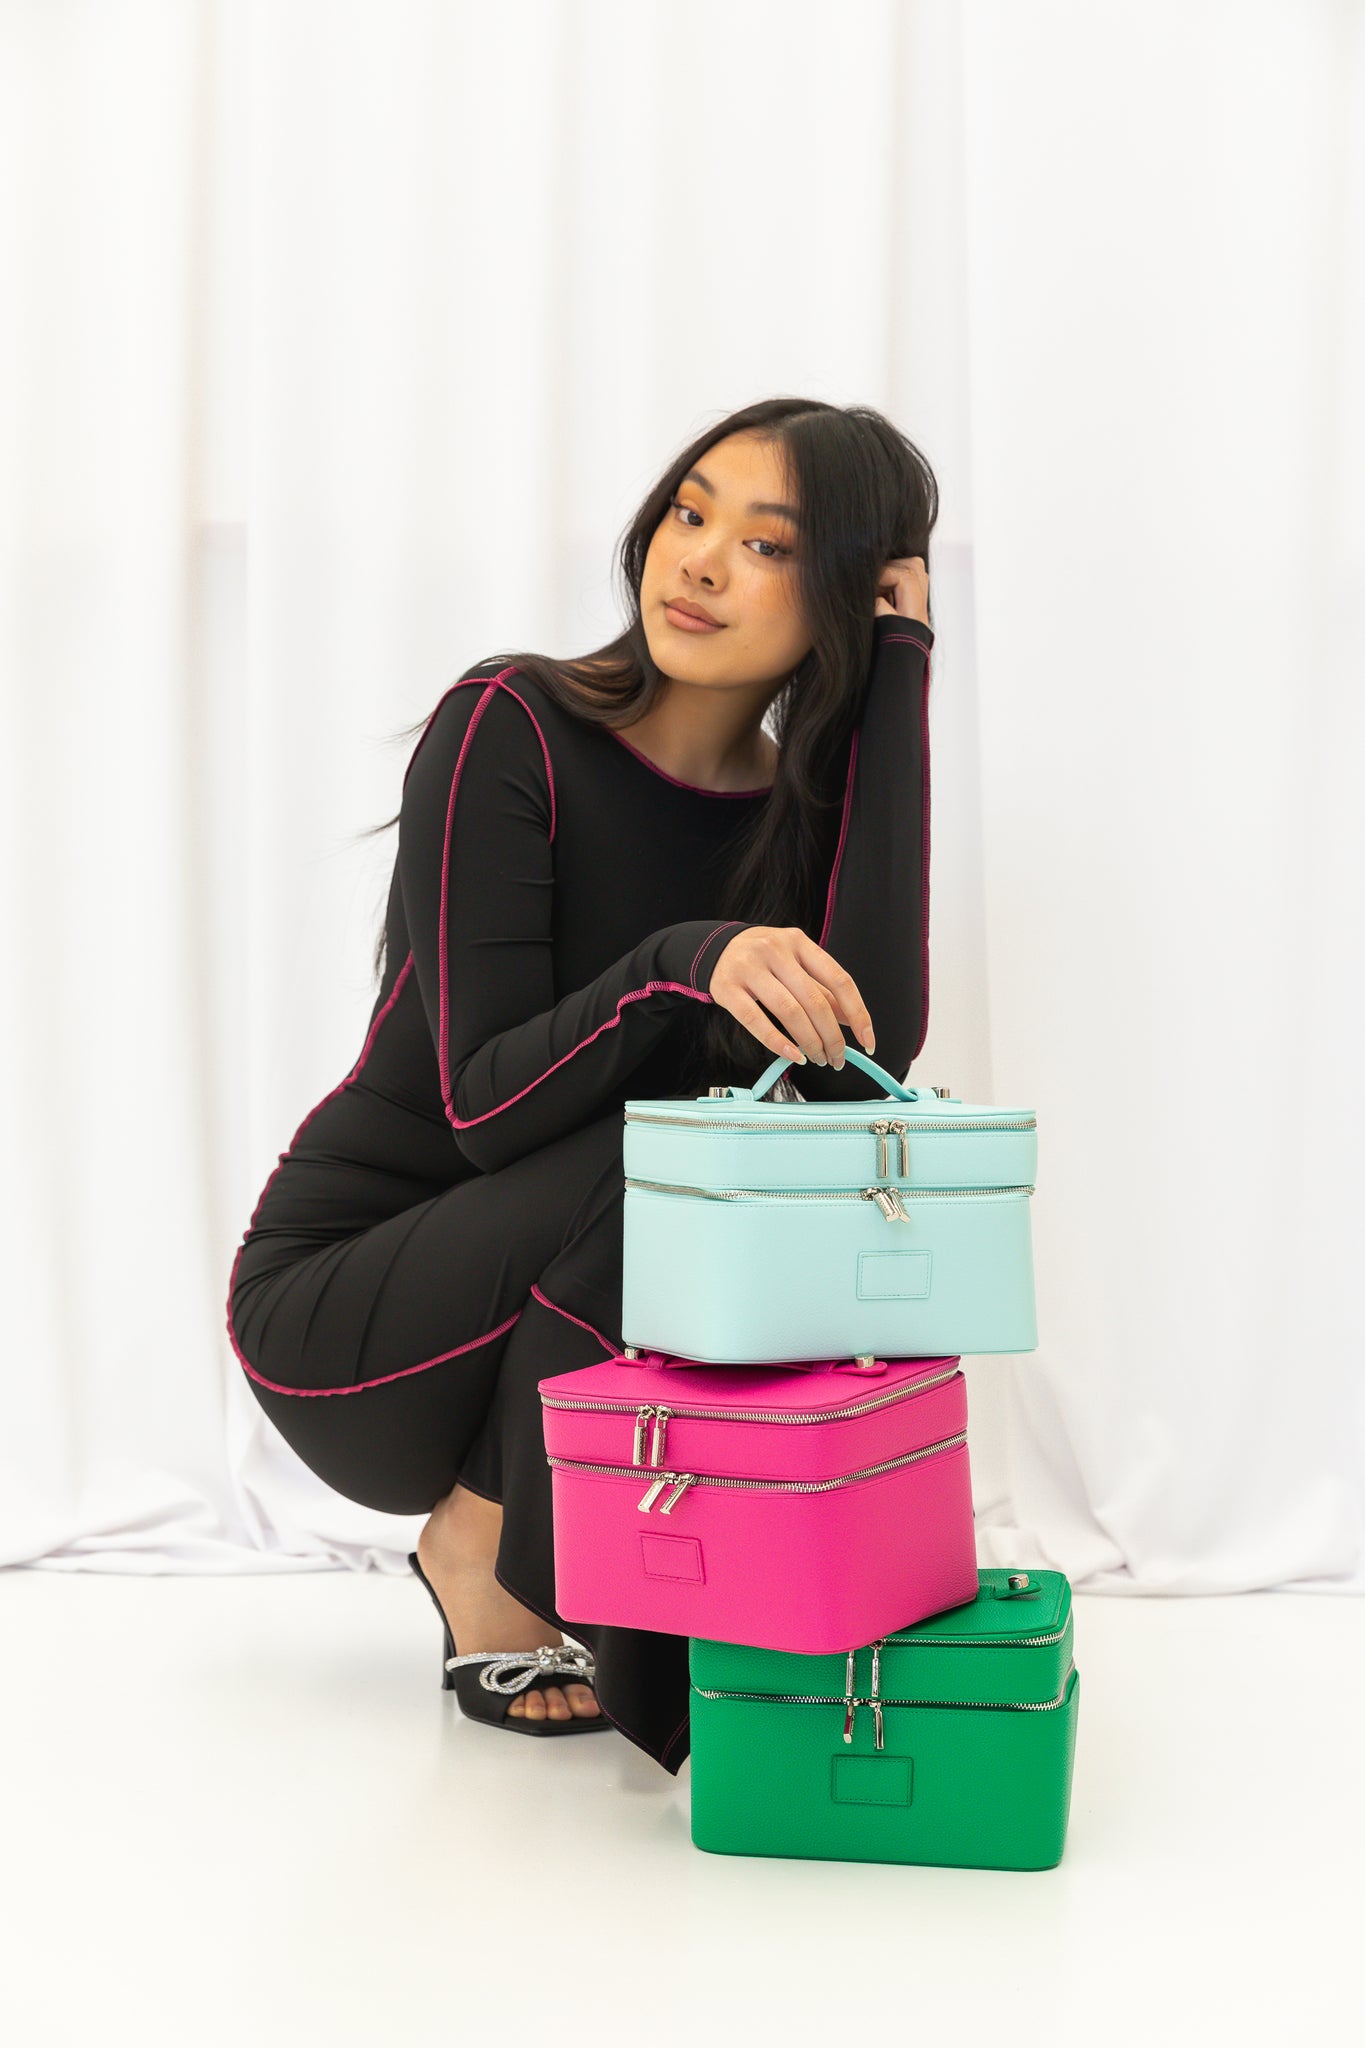 The Duo Vanity Case in Powder Blue, Barbie Pink, and Kelly Green.